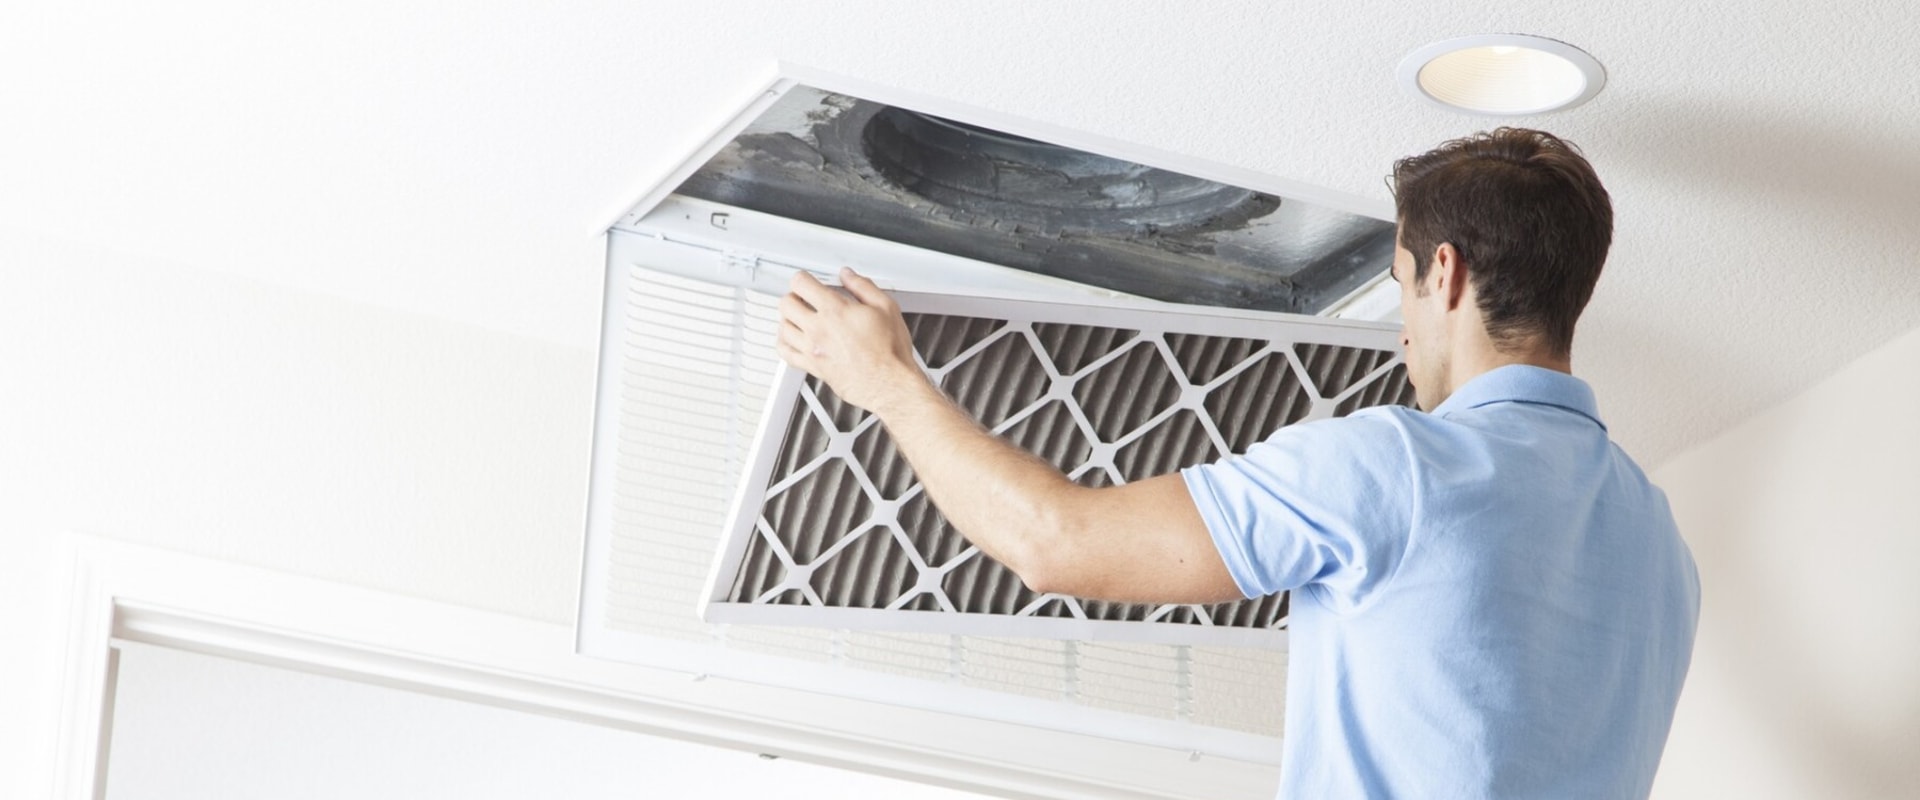 Expert Air Duct Cleaning Services in Coral Gables FL